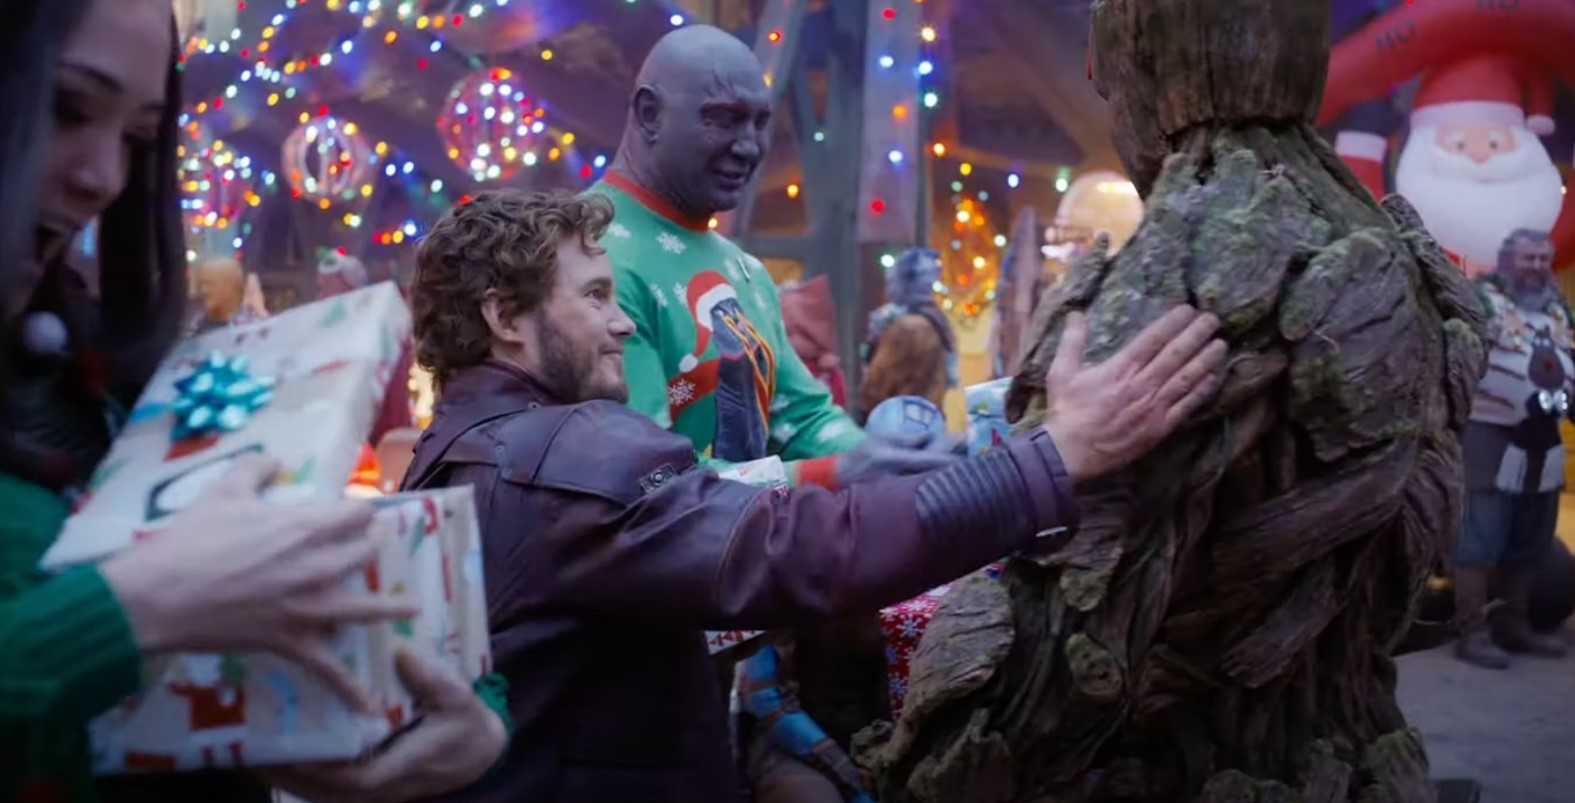 GOTG holiday special